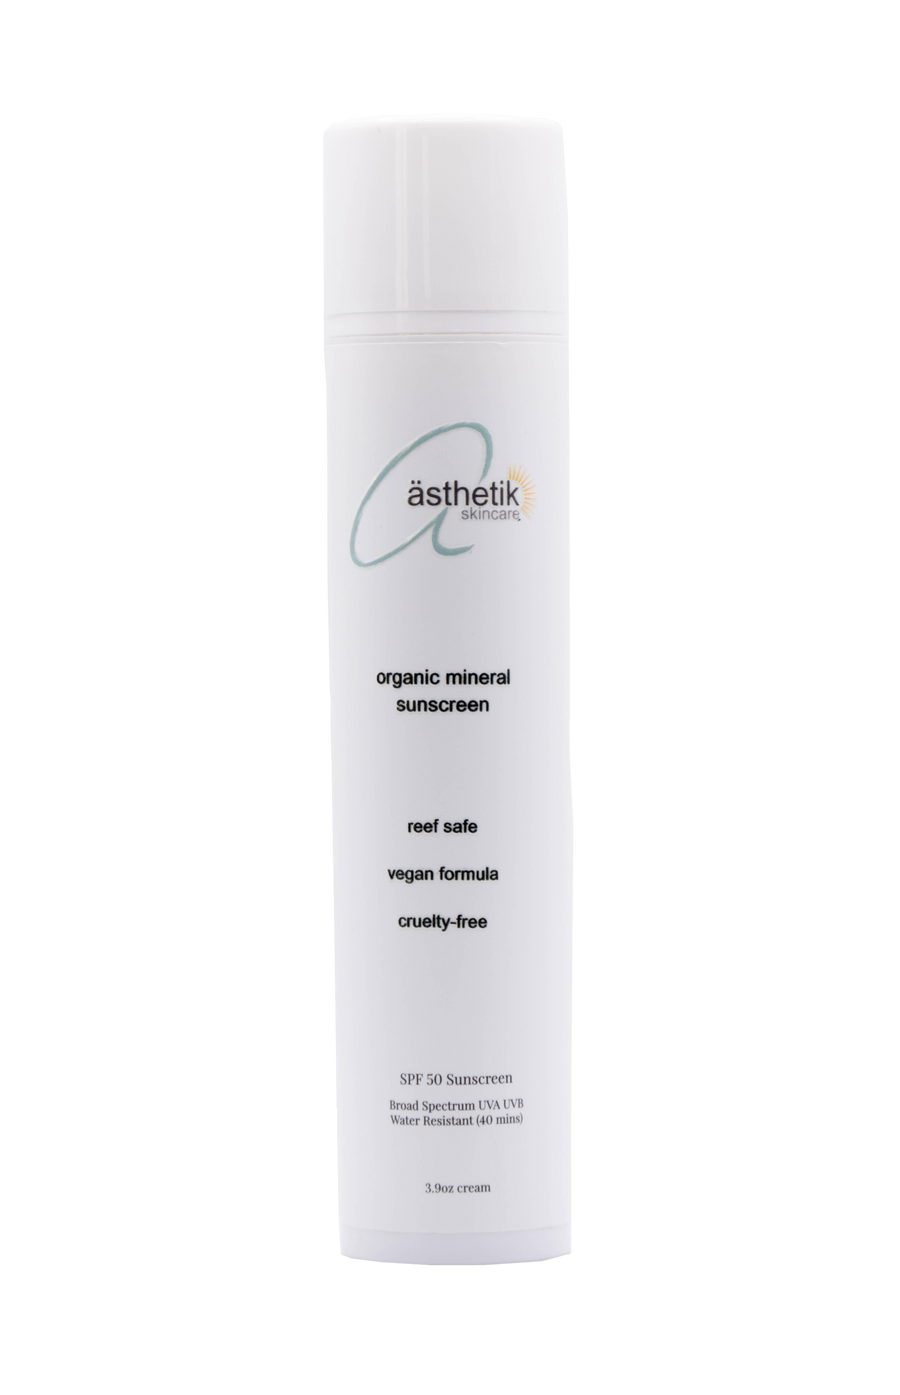 Organic tinted mineral sunscreen SPF 50 by ästhetik skincare. Natural, plant-based formula for radiant, protected skin.